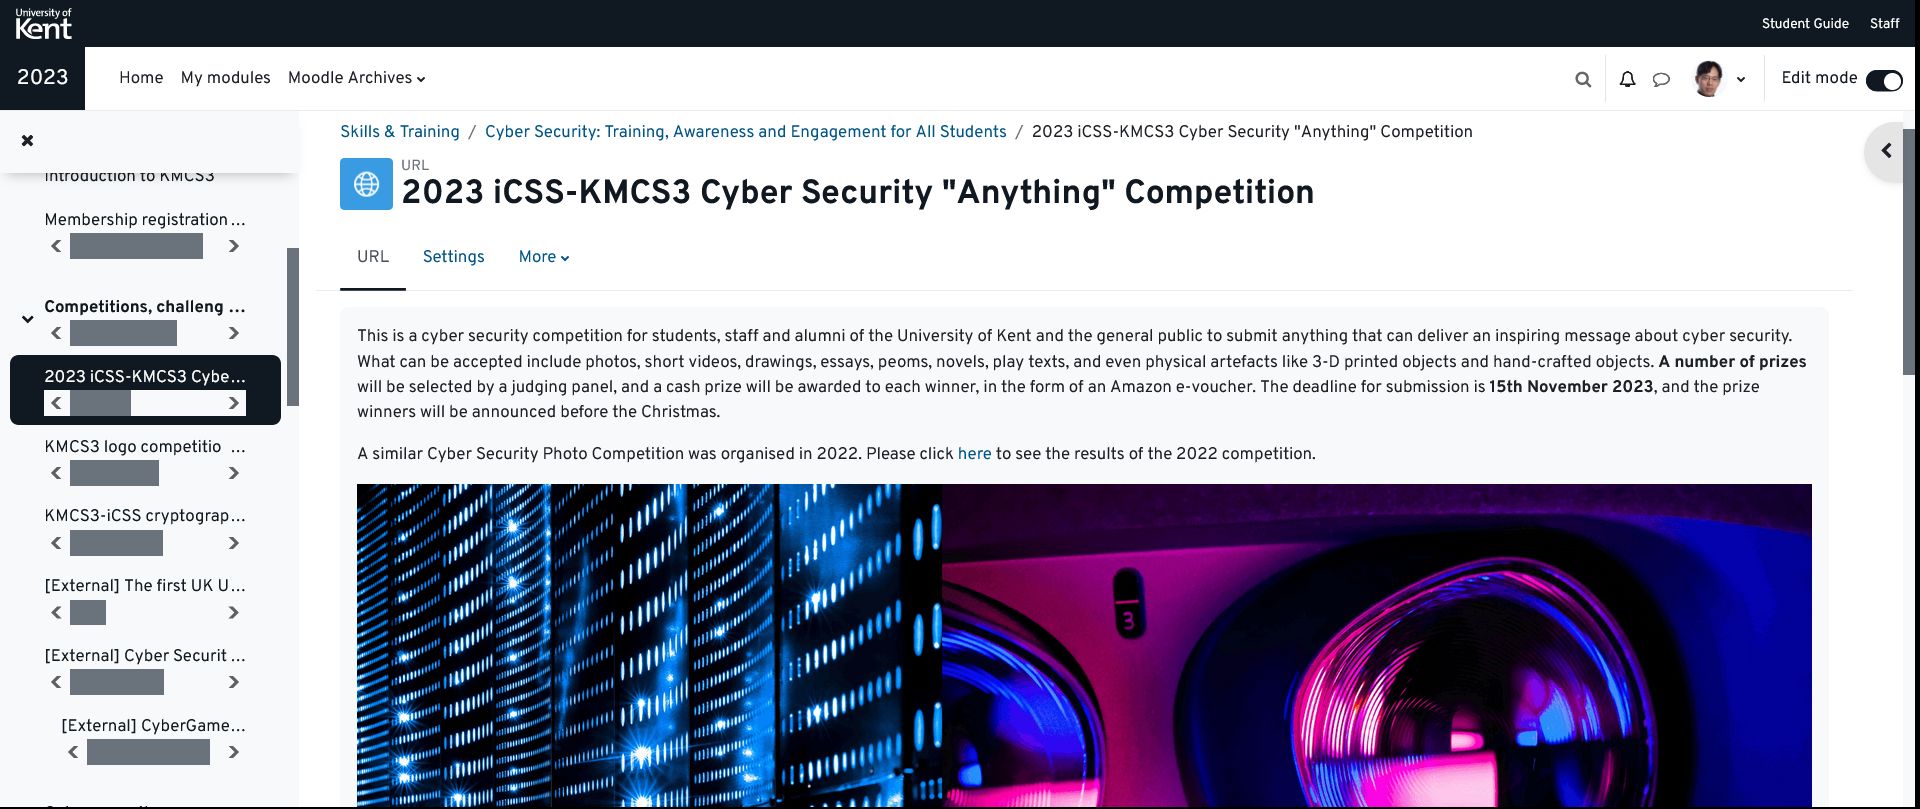 2023 iCSS-KMCS3 Cyber Security Anything Competition